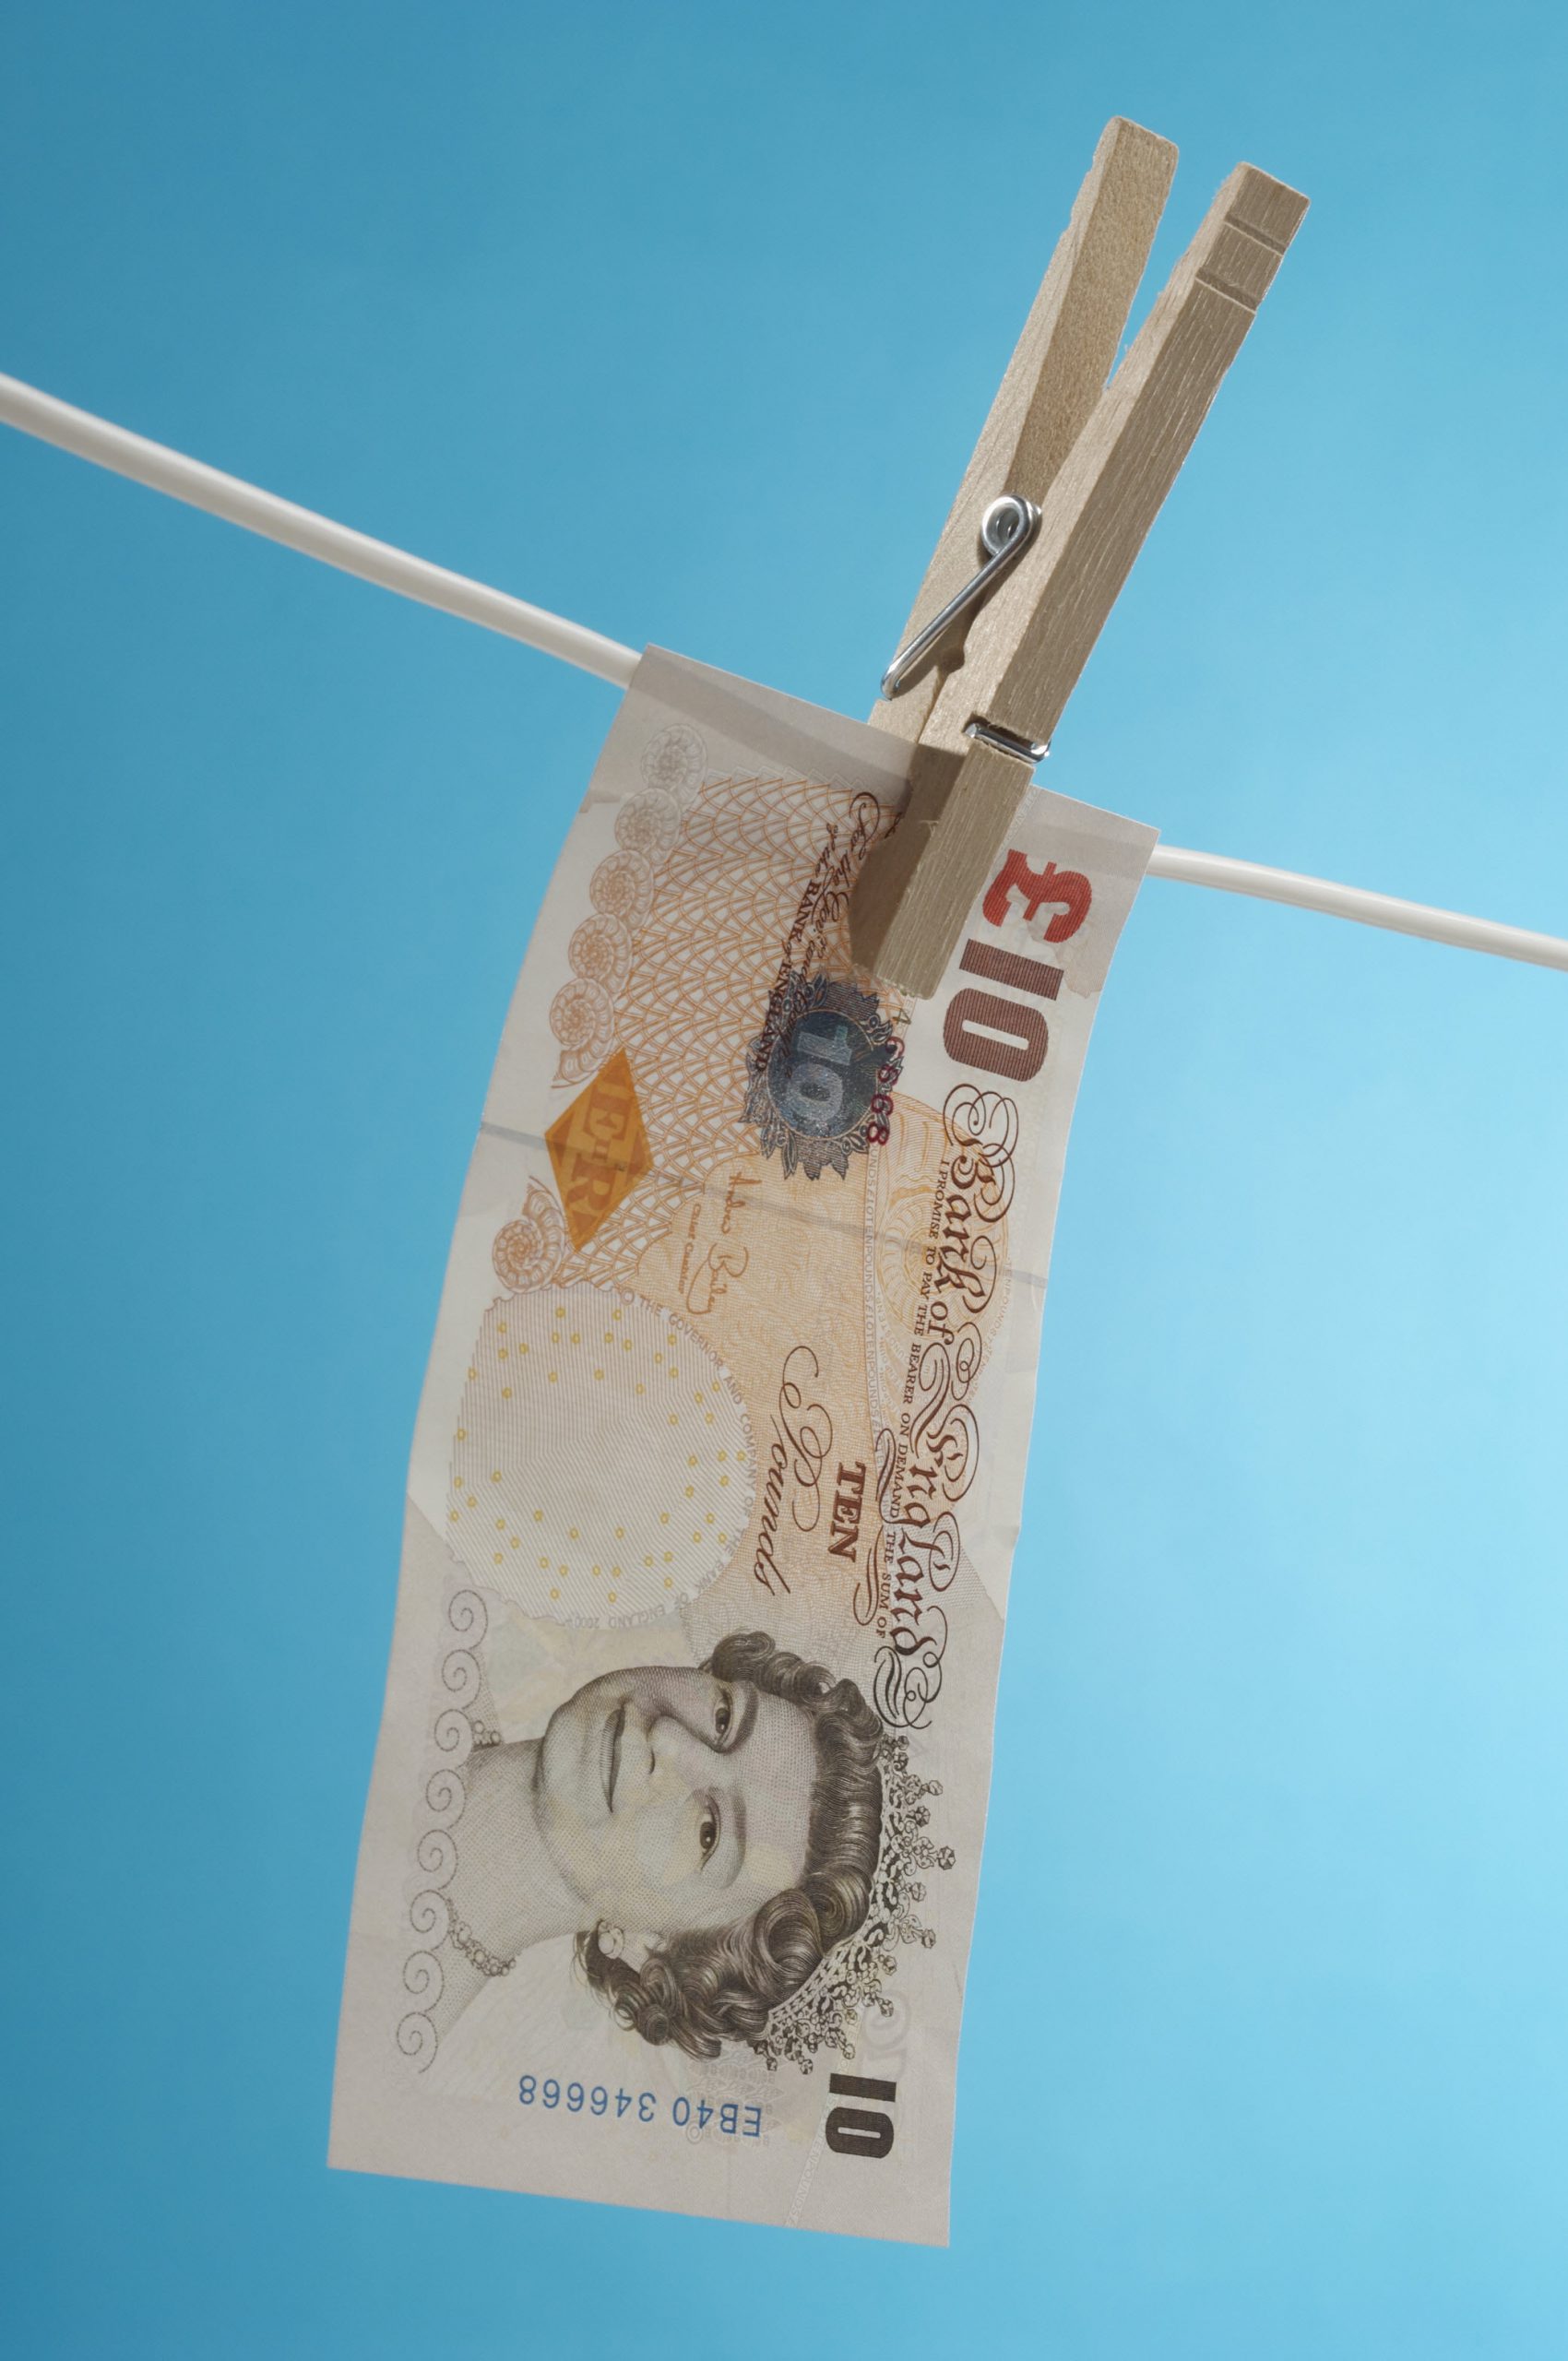 British paper currency on clothesline